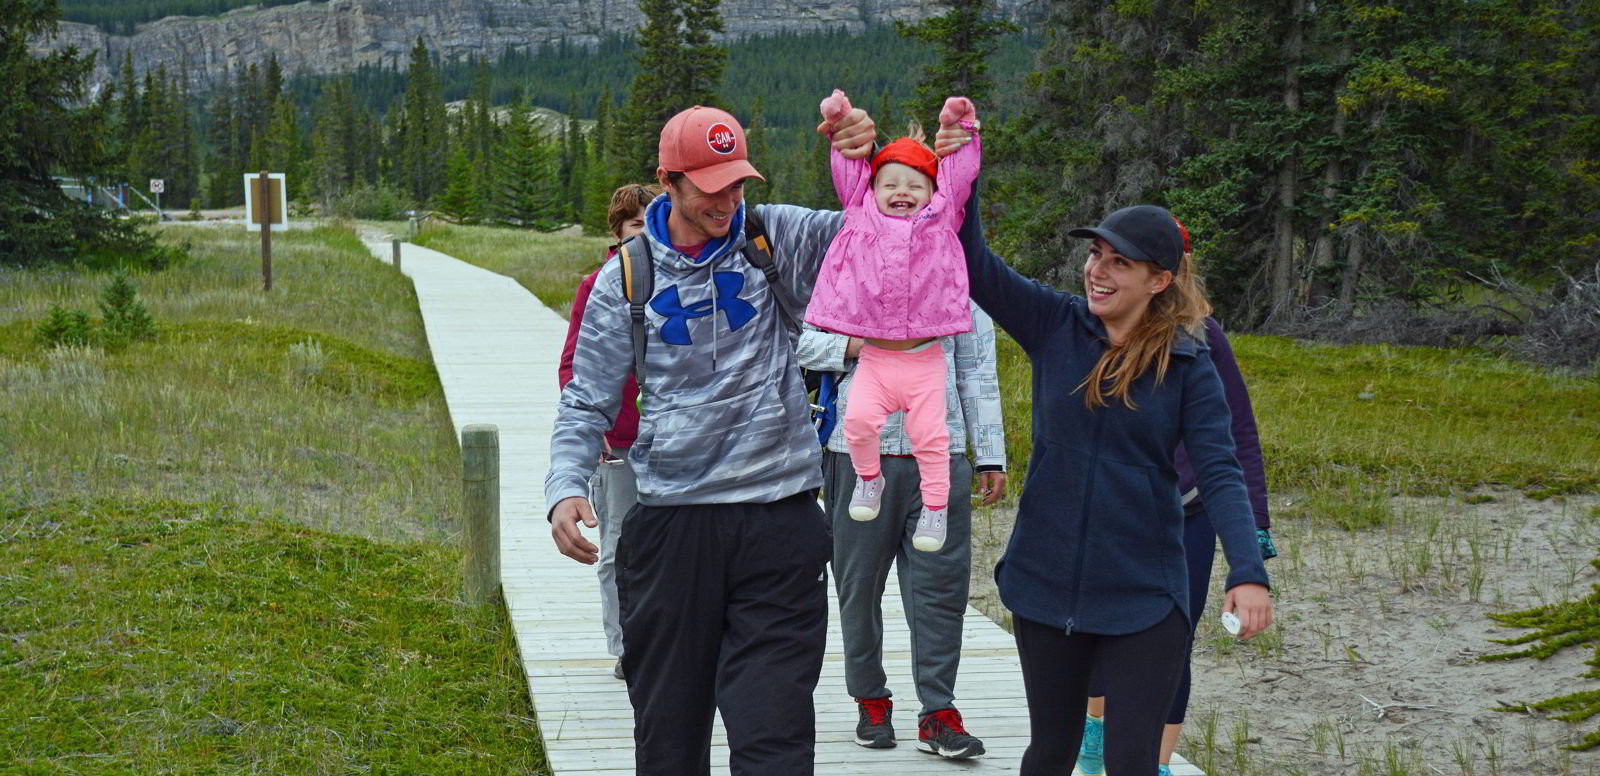 An image of a little girl being lifted into the air on a family hike near Siffleur Falls, Alberta - Glamping in Alberta.